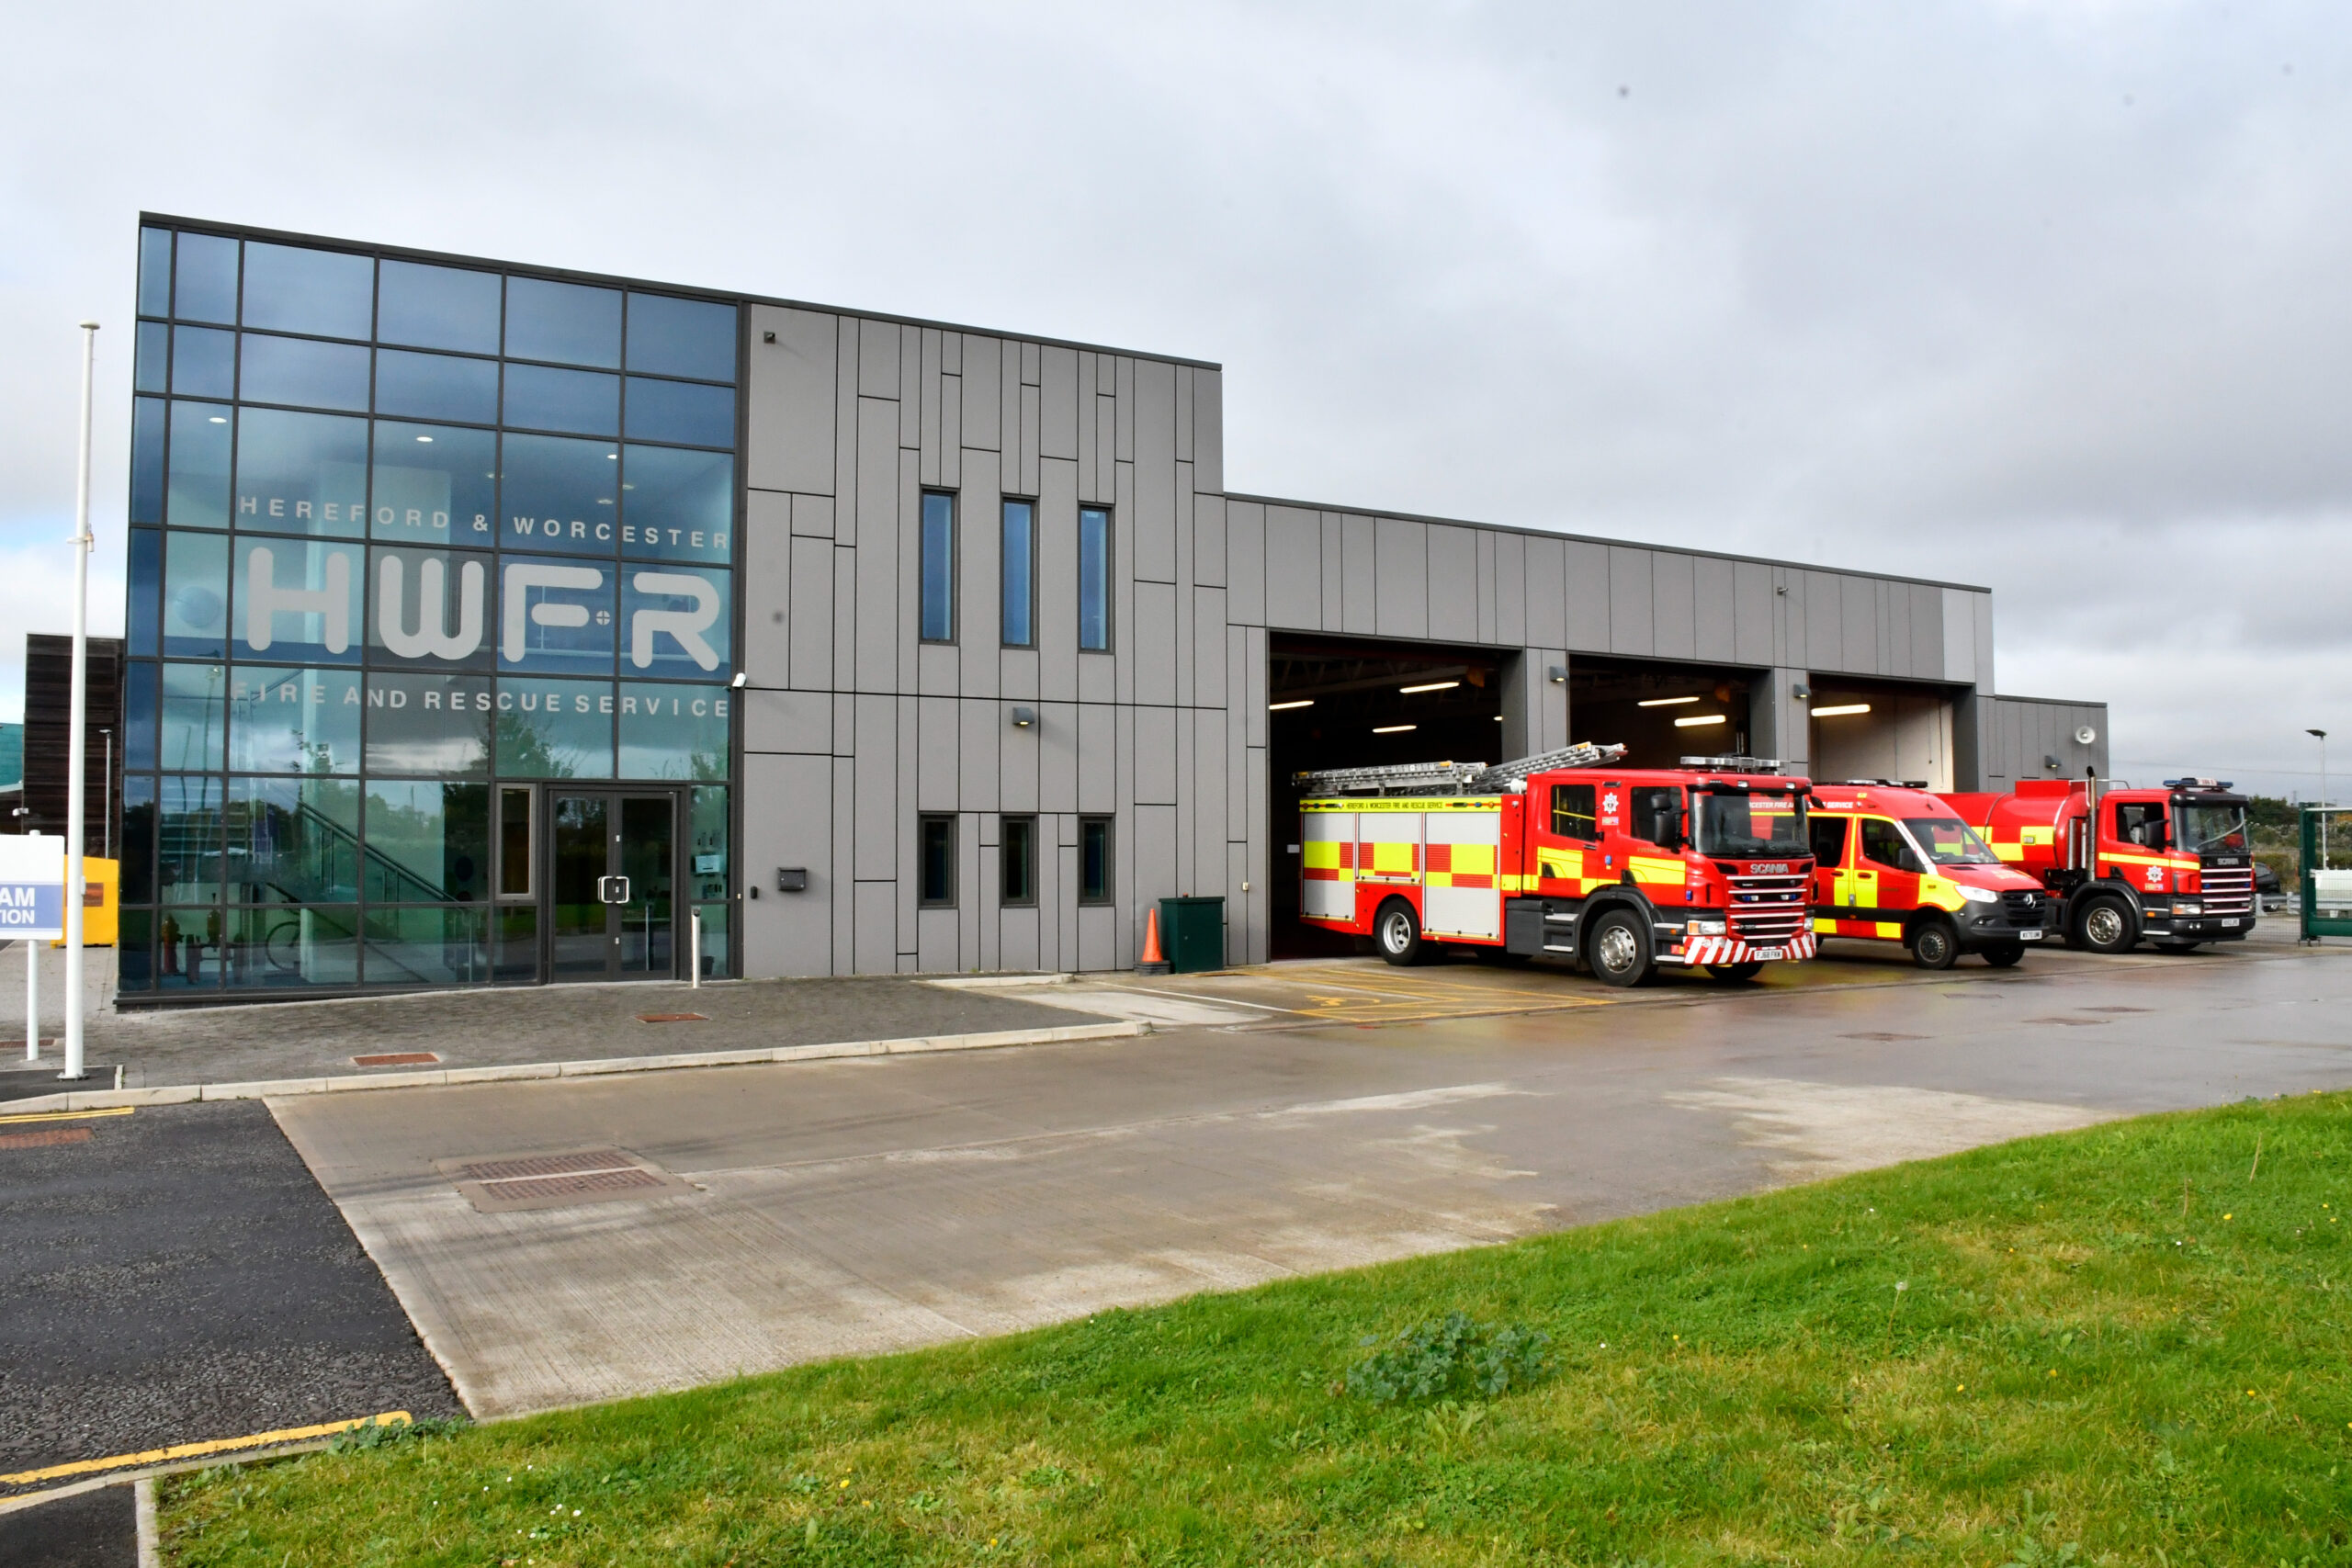 Image of Evesham Fire Station from outside